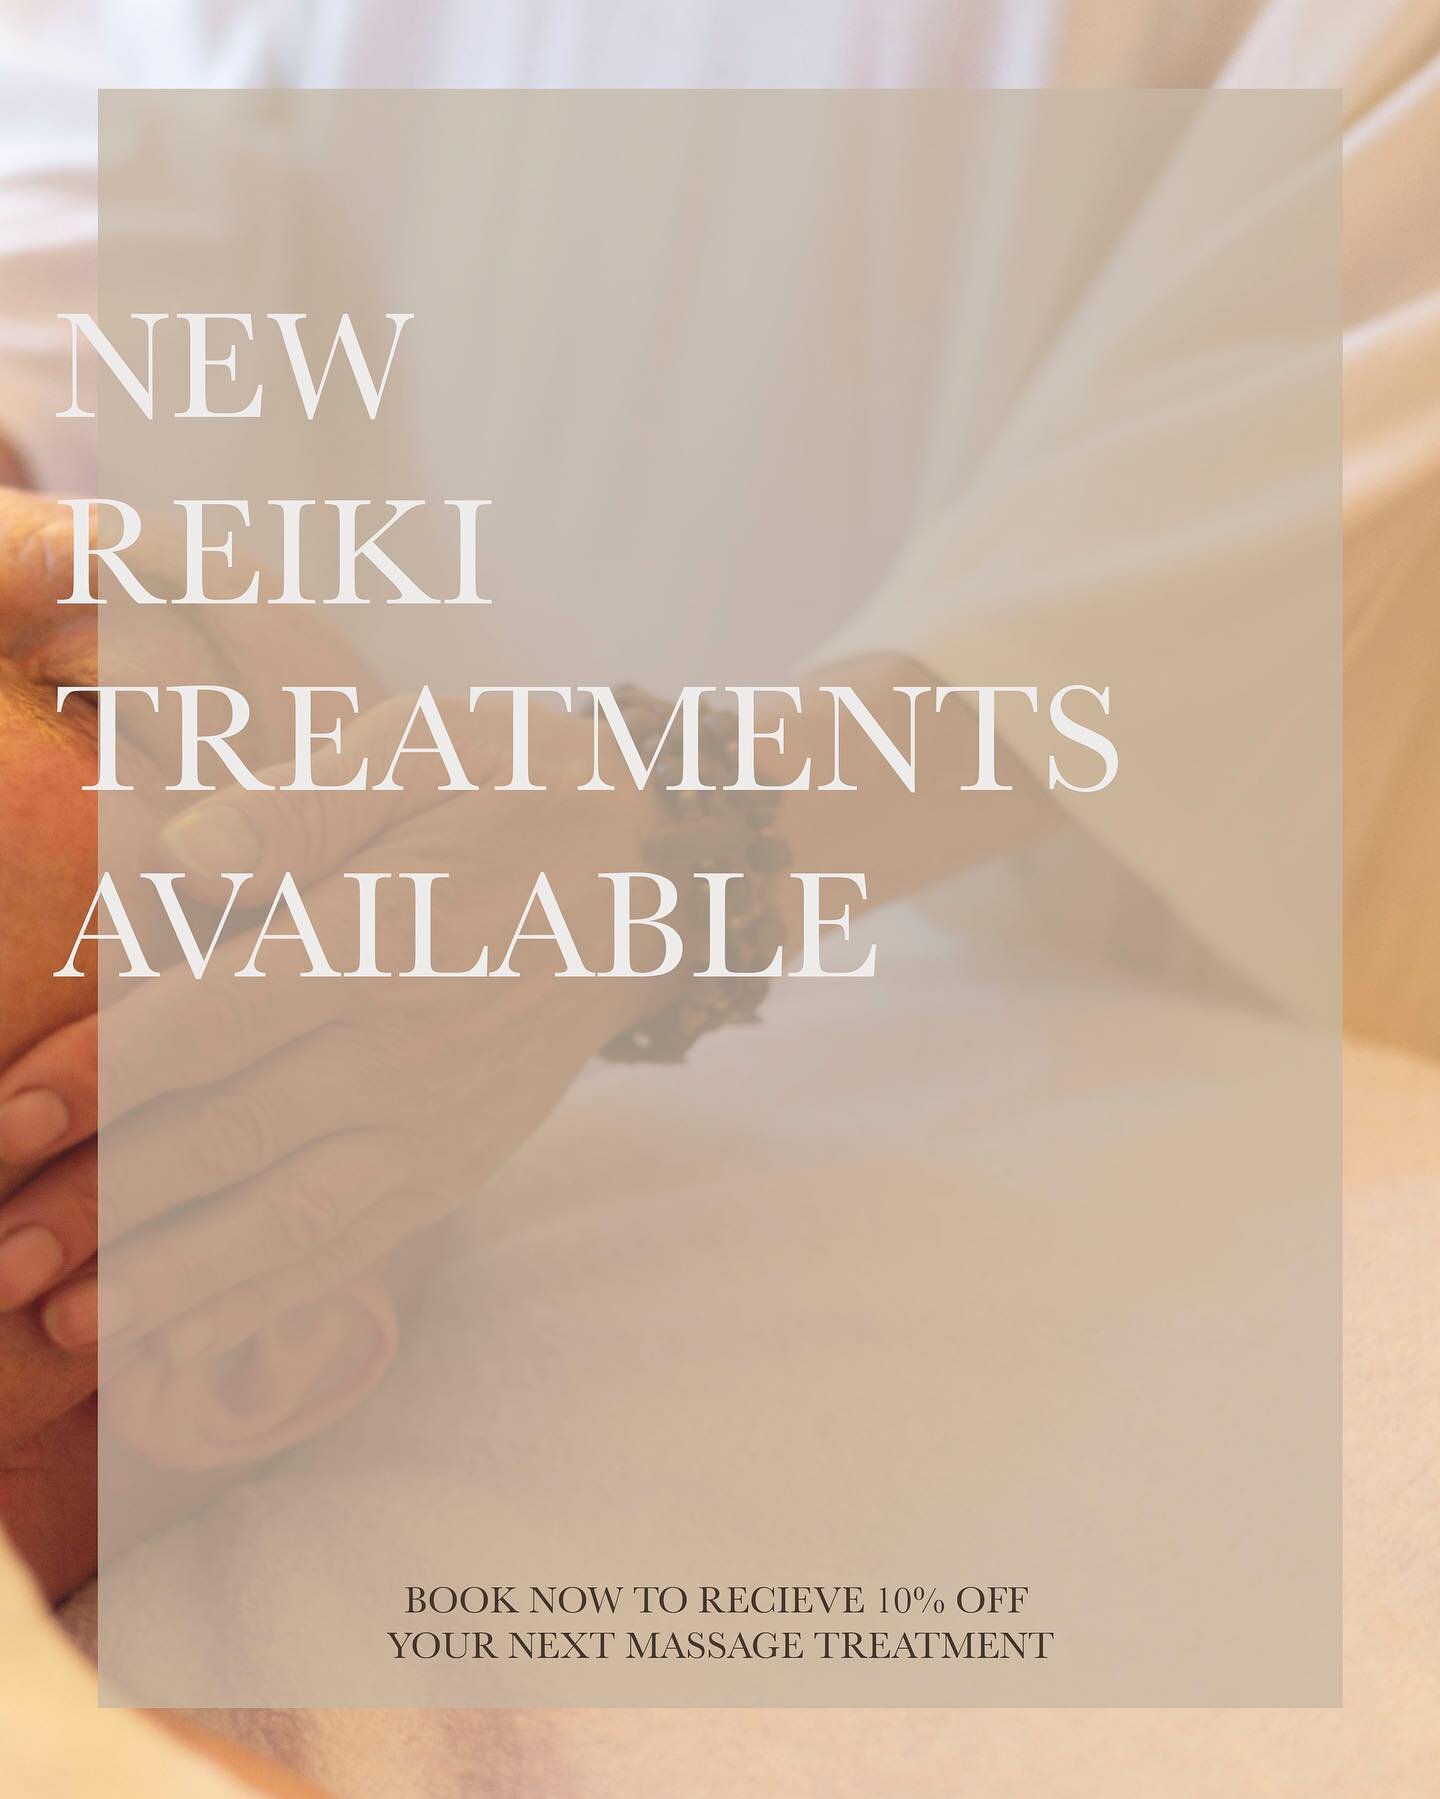 ✨!!REIKI TREATMENTS NOW AVAILABLE!!✨
We are so happy to announce that we are now offering reiki treatments on Tuesday evenings, call to book and receive 10% off your next massage treatment when you do! 

Reiki is a holistic form of healing which uses